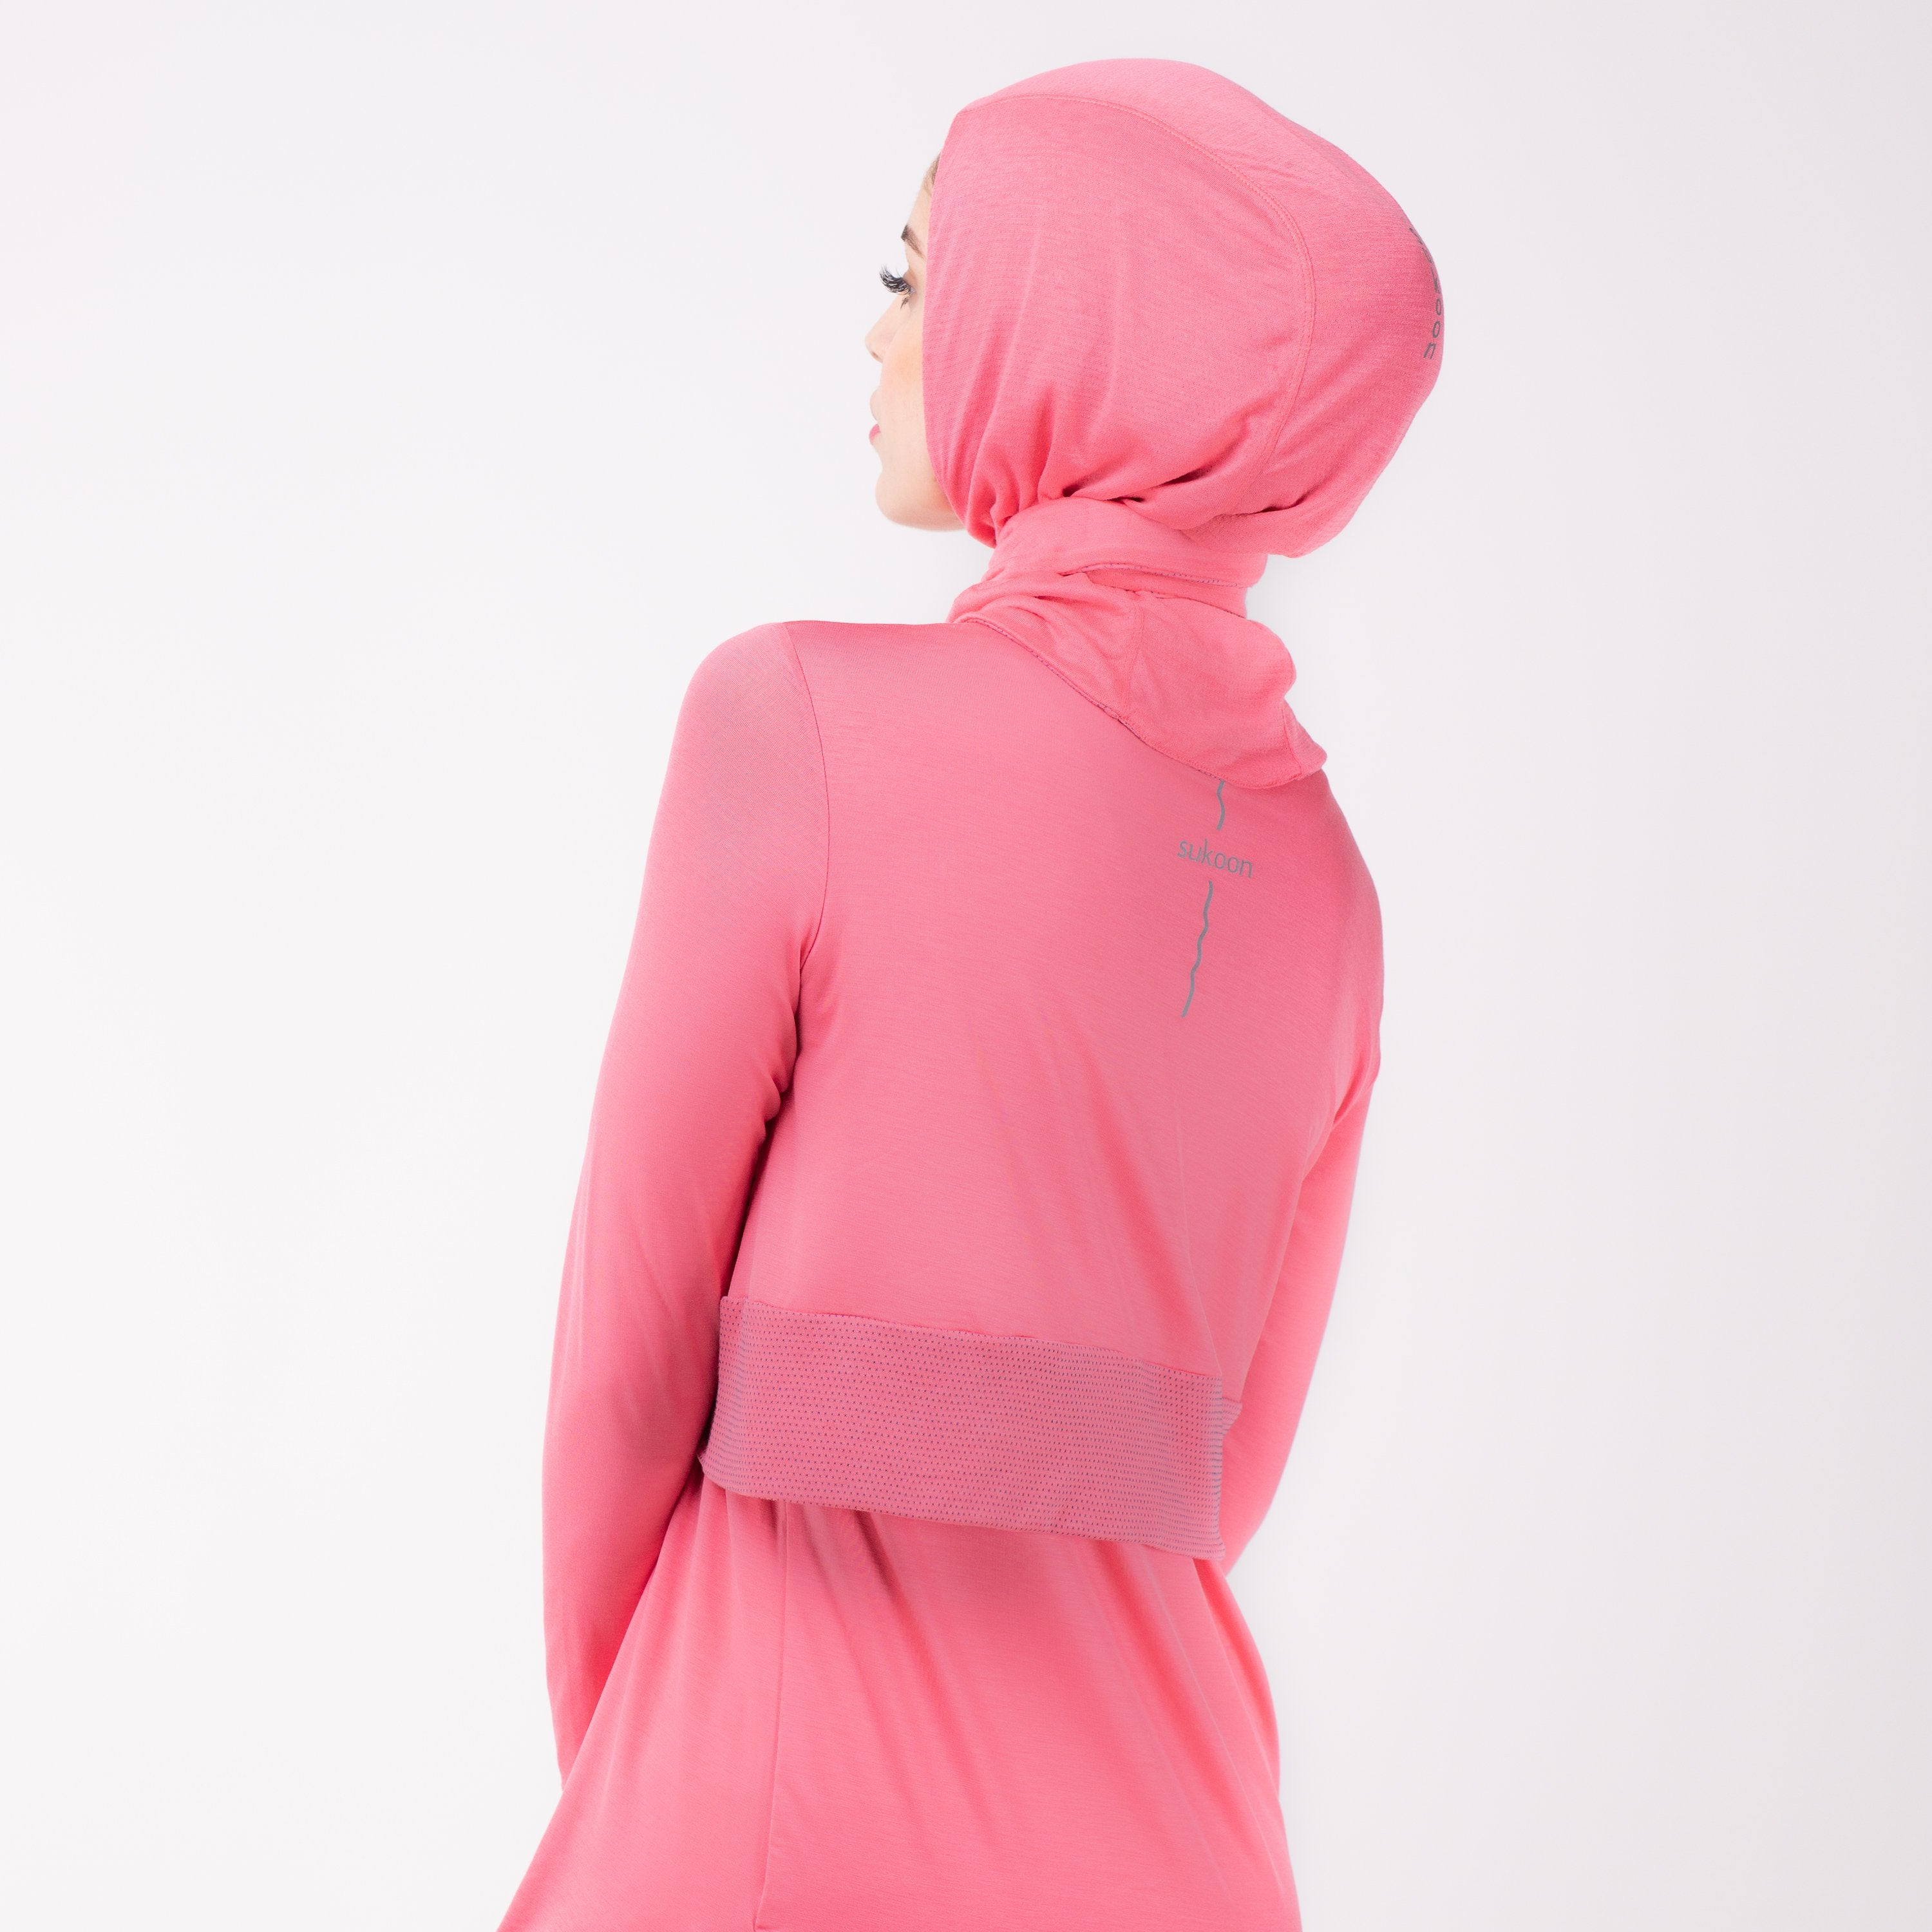 Back detail of a woman in a pink shirt with a matching pink HAWA hijab.